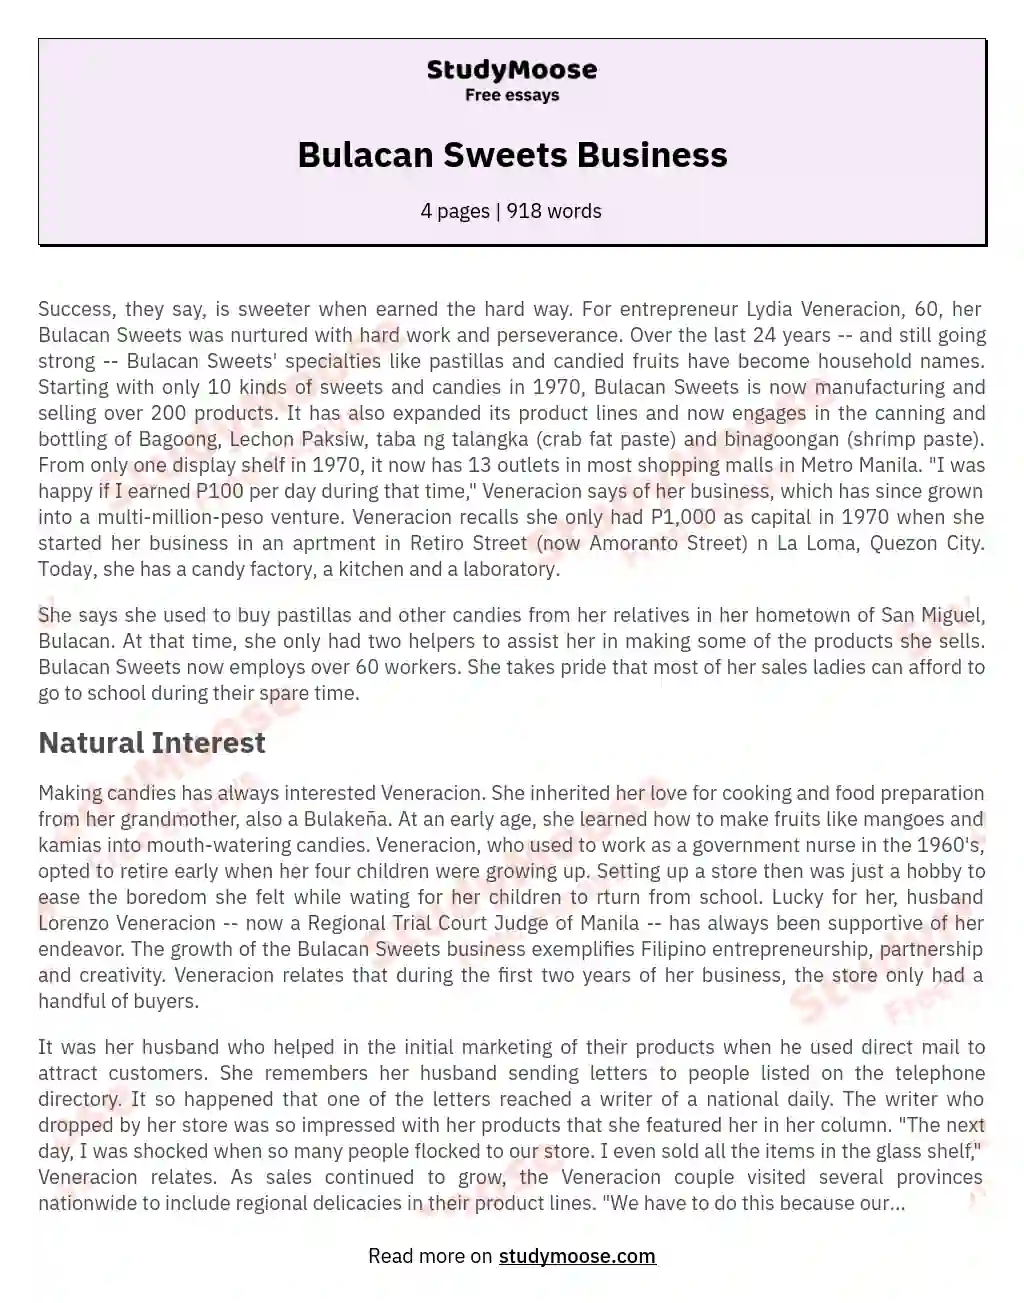 Bulacan Sweets Business essay